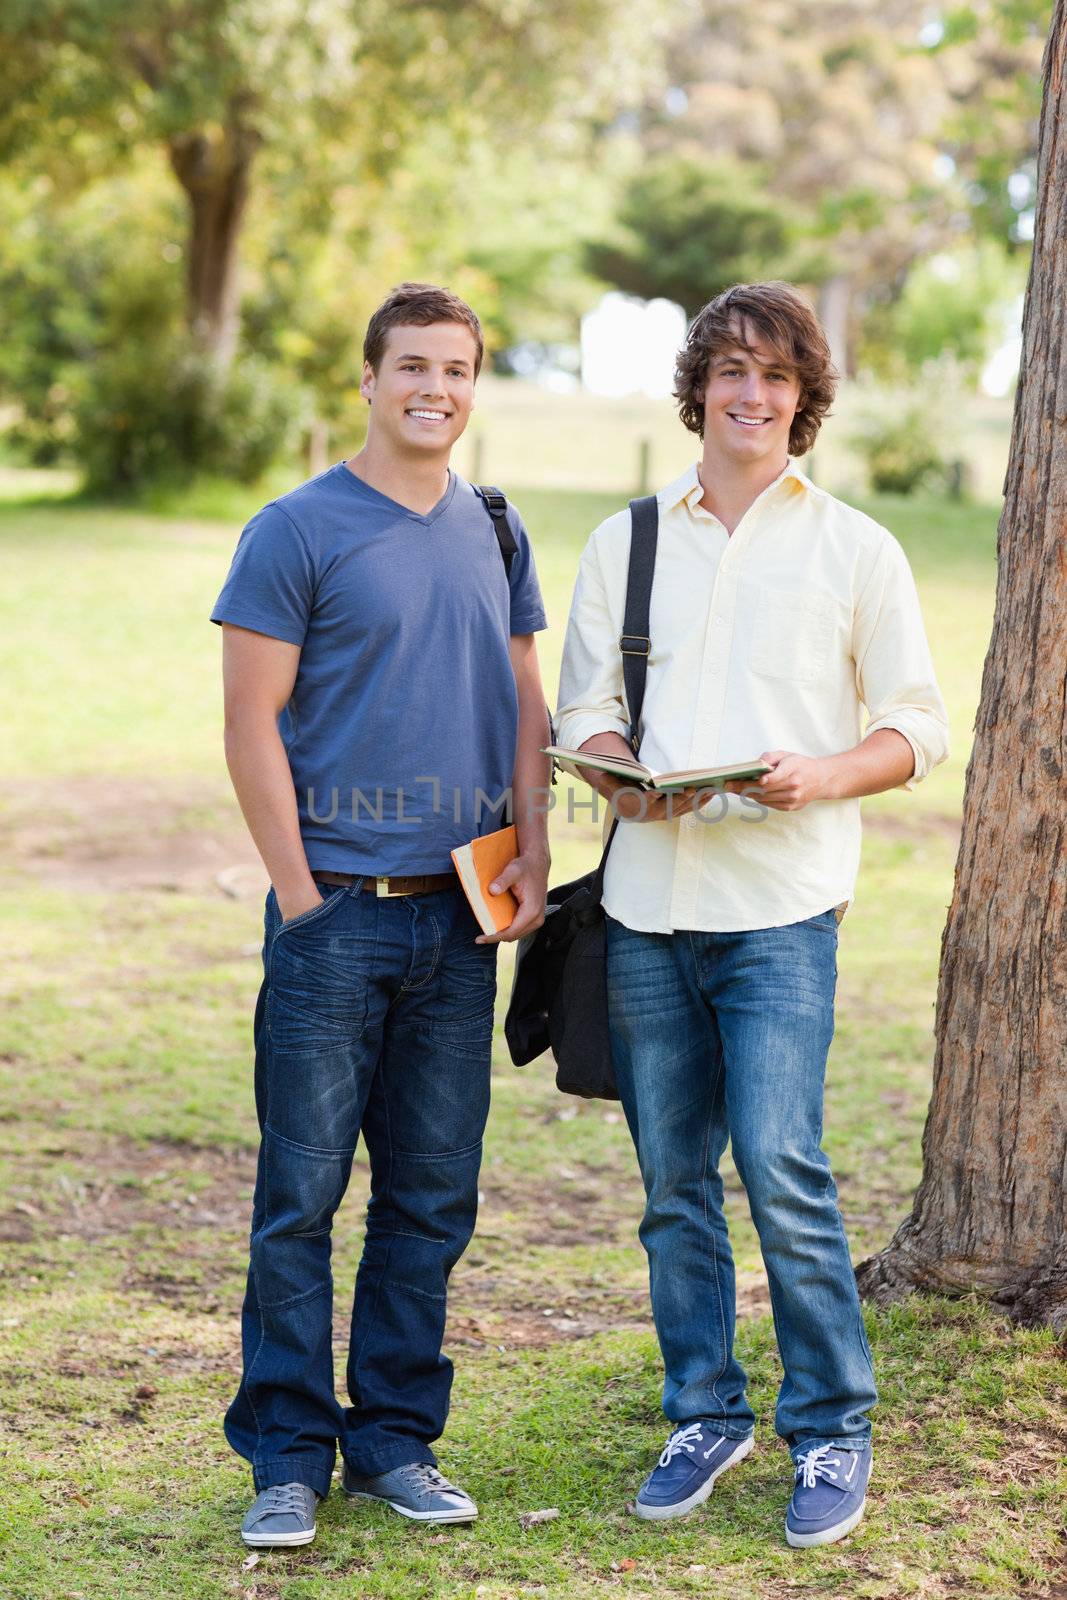 Portrait of two smiling male students posing in a park